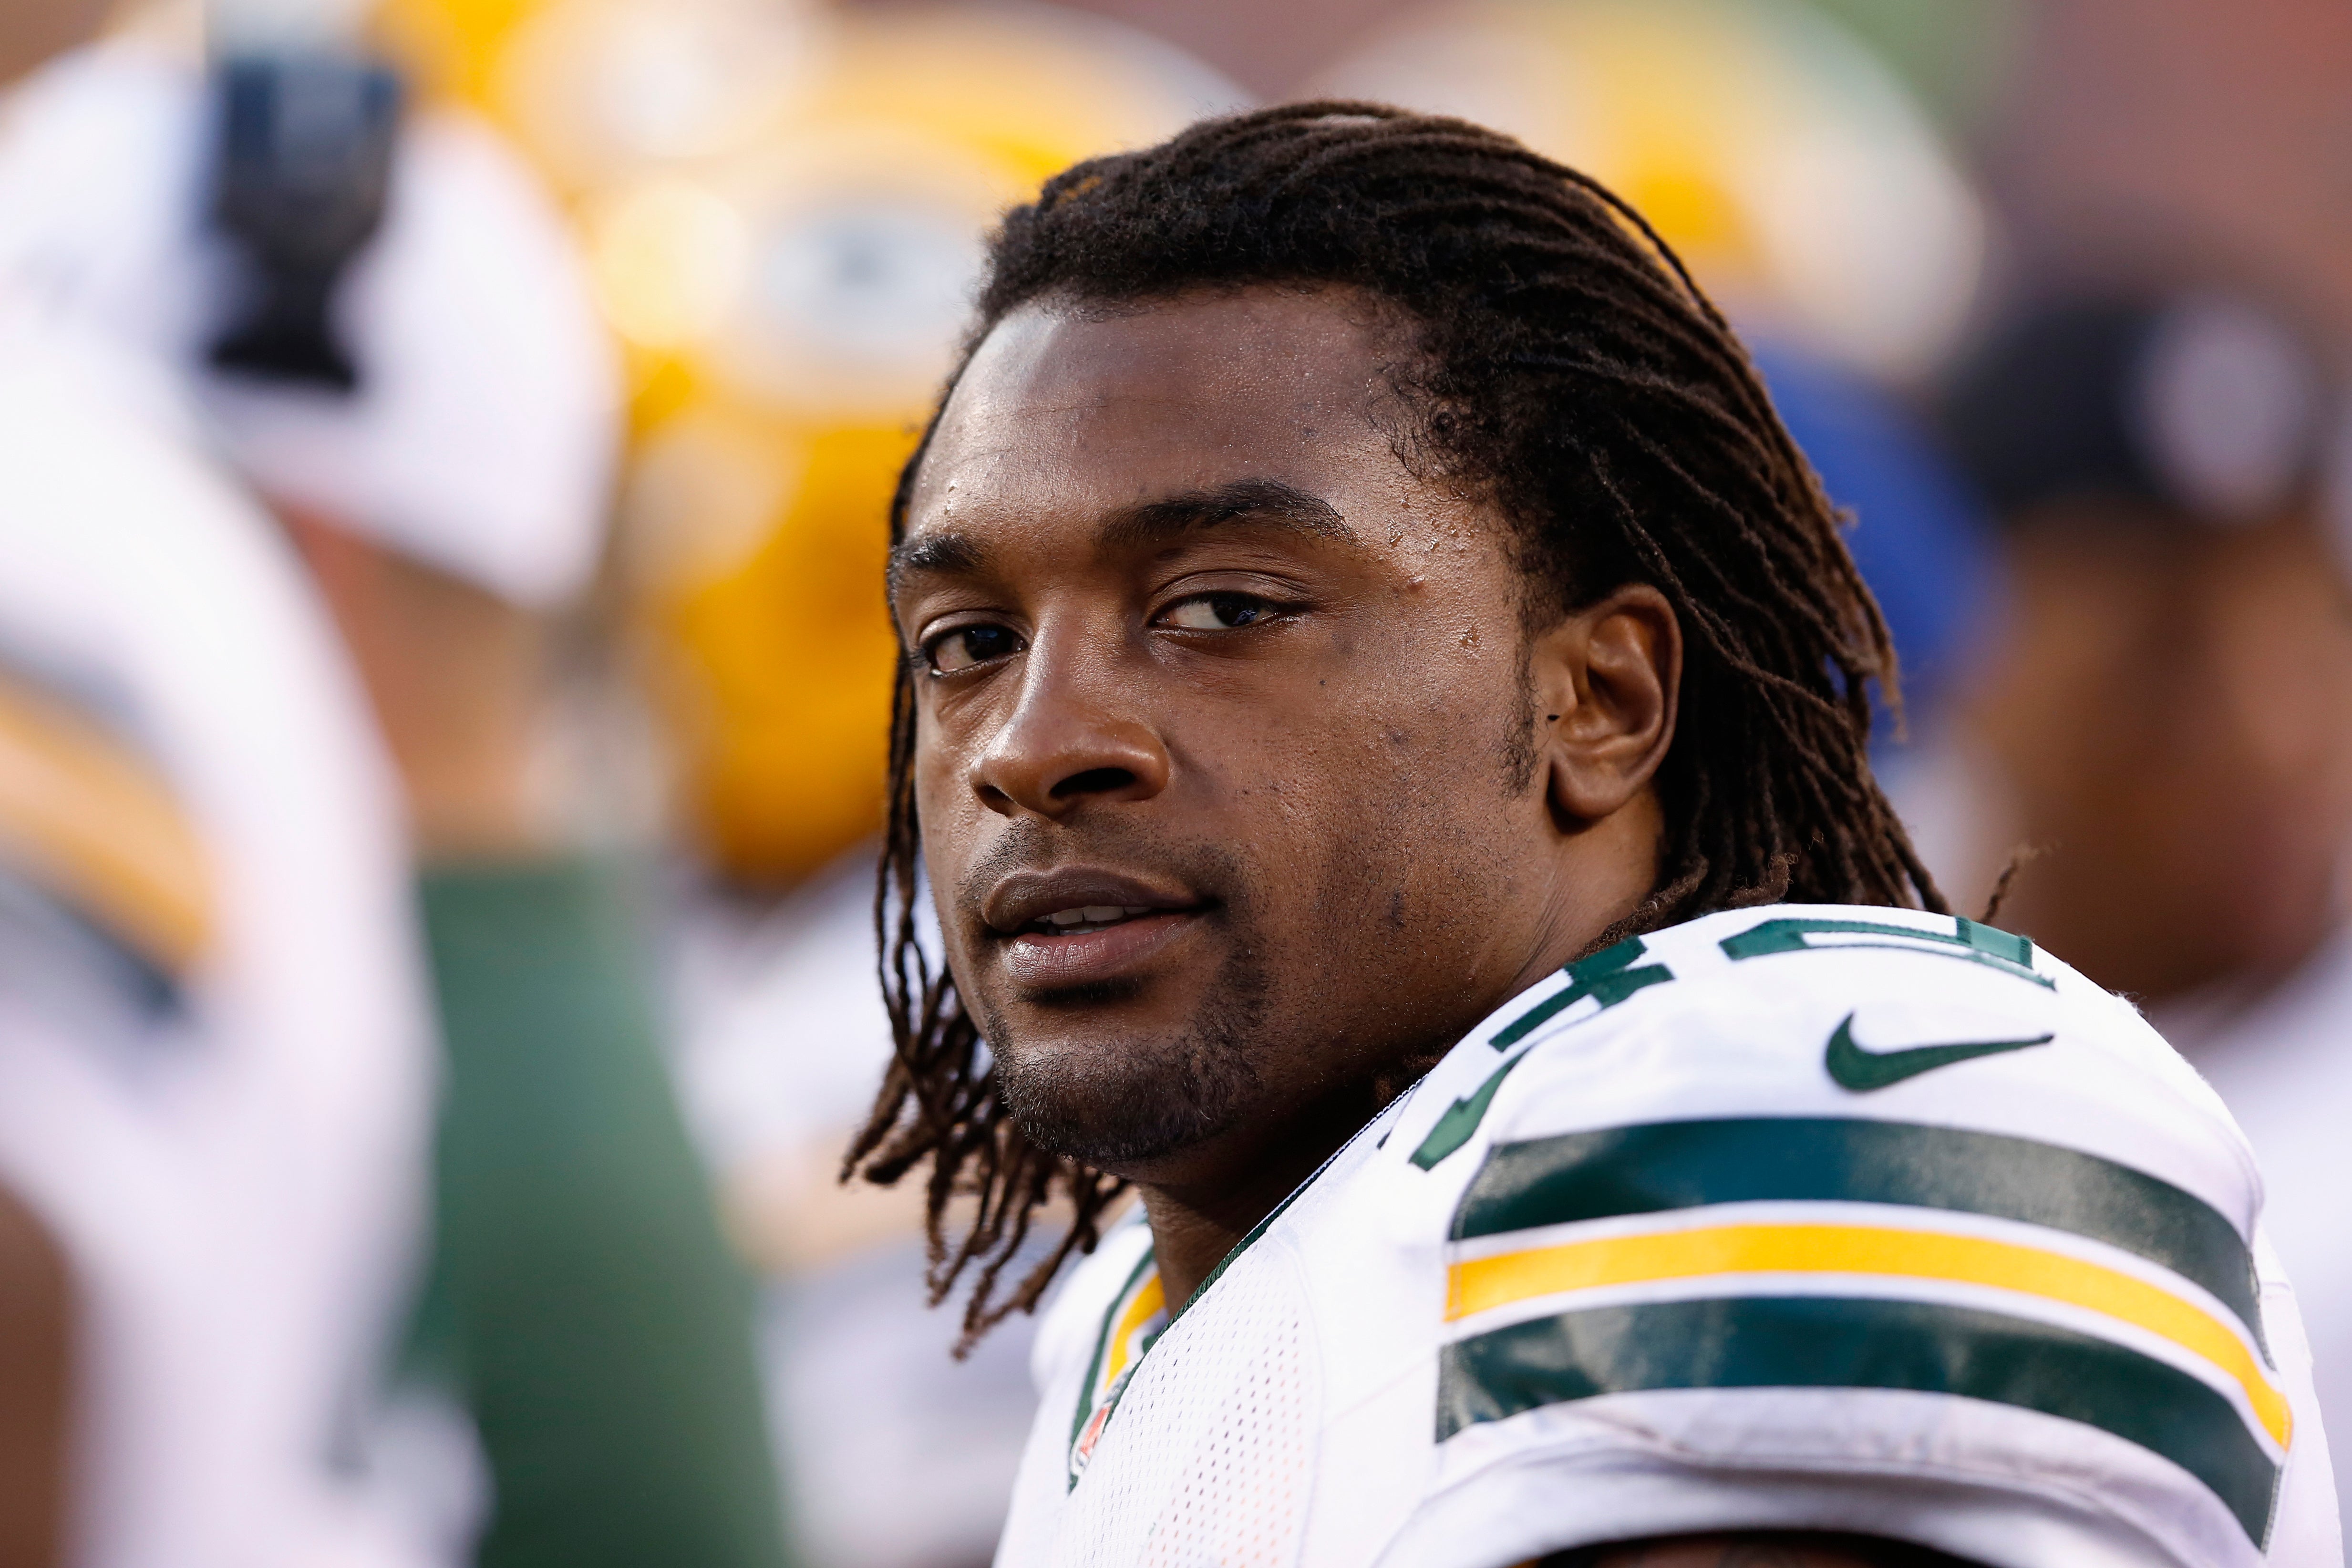 Cedric Benson Nfl Player Killed In Motorcycle Crash At Age